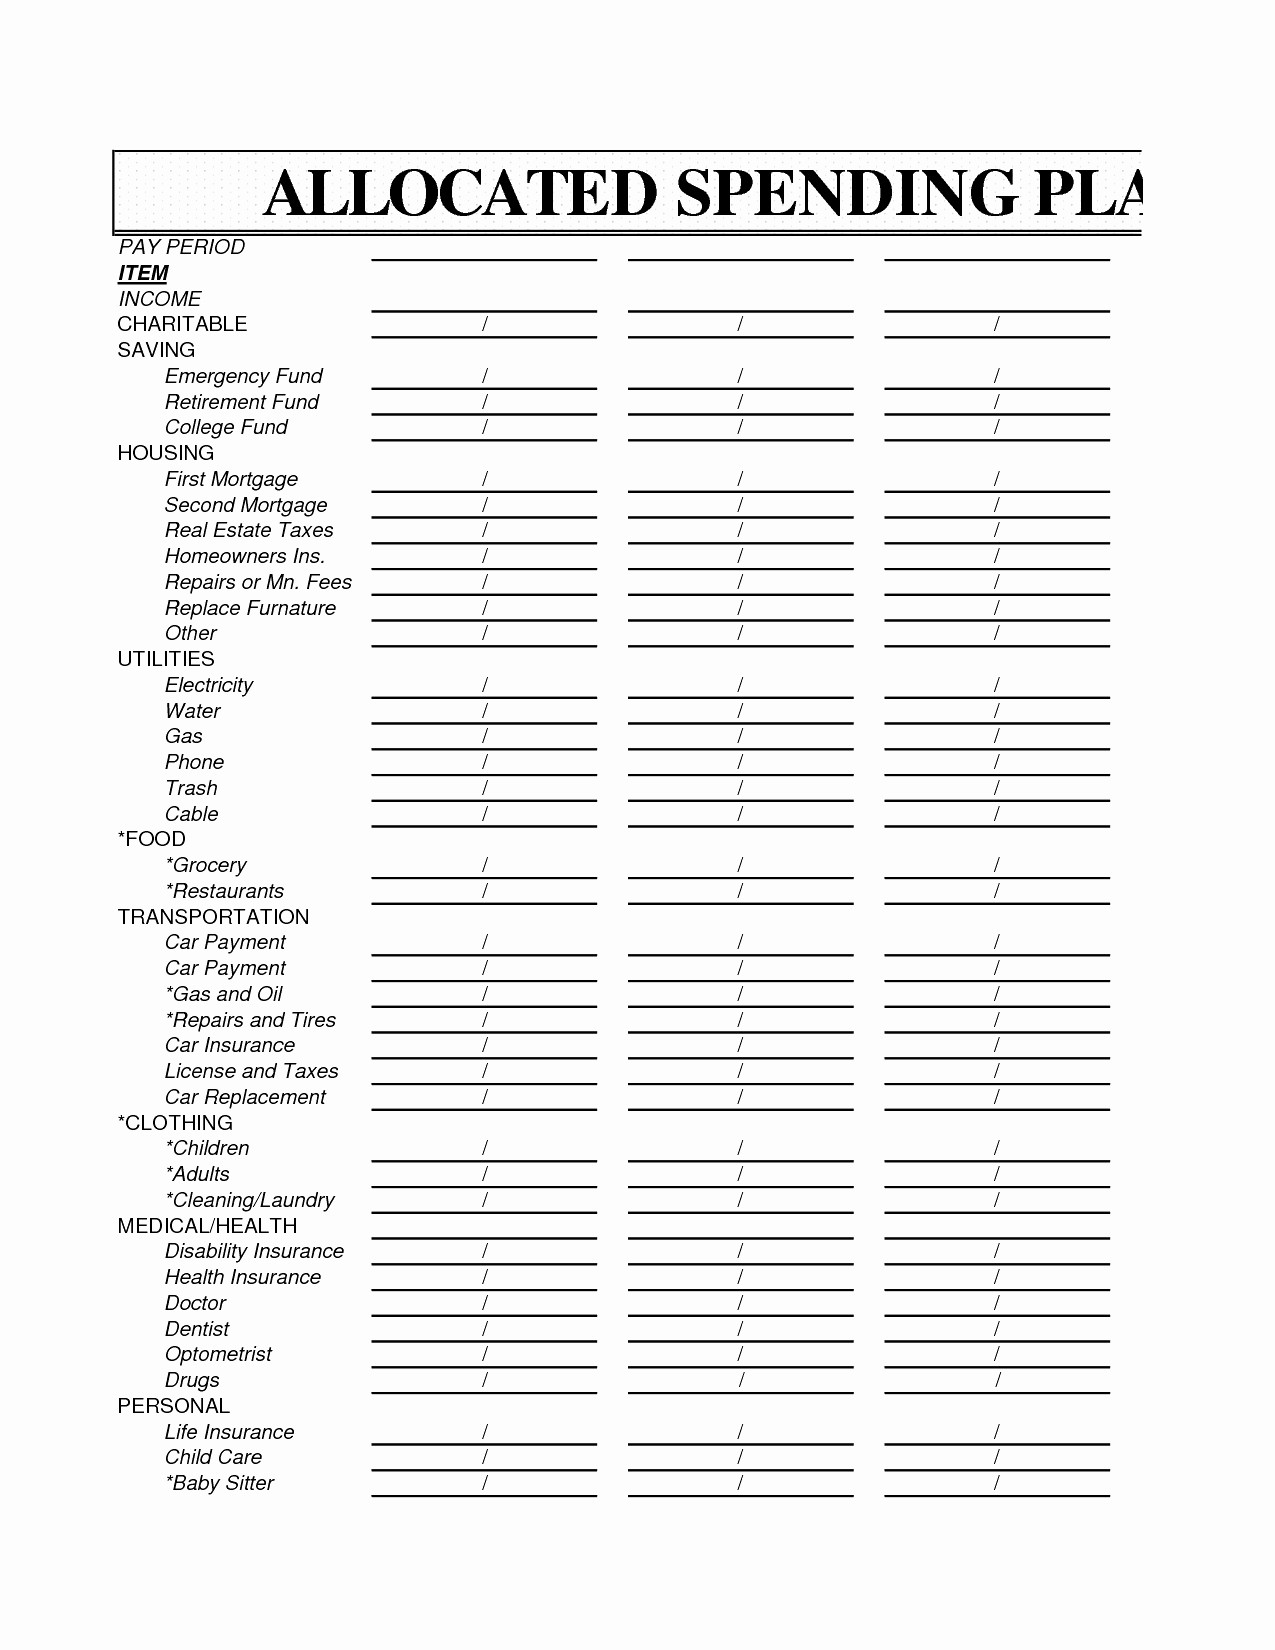 Allocated Spending Plan Form Awesome Dave Ramsey Document Excel